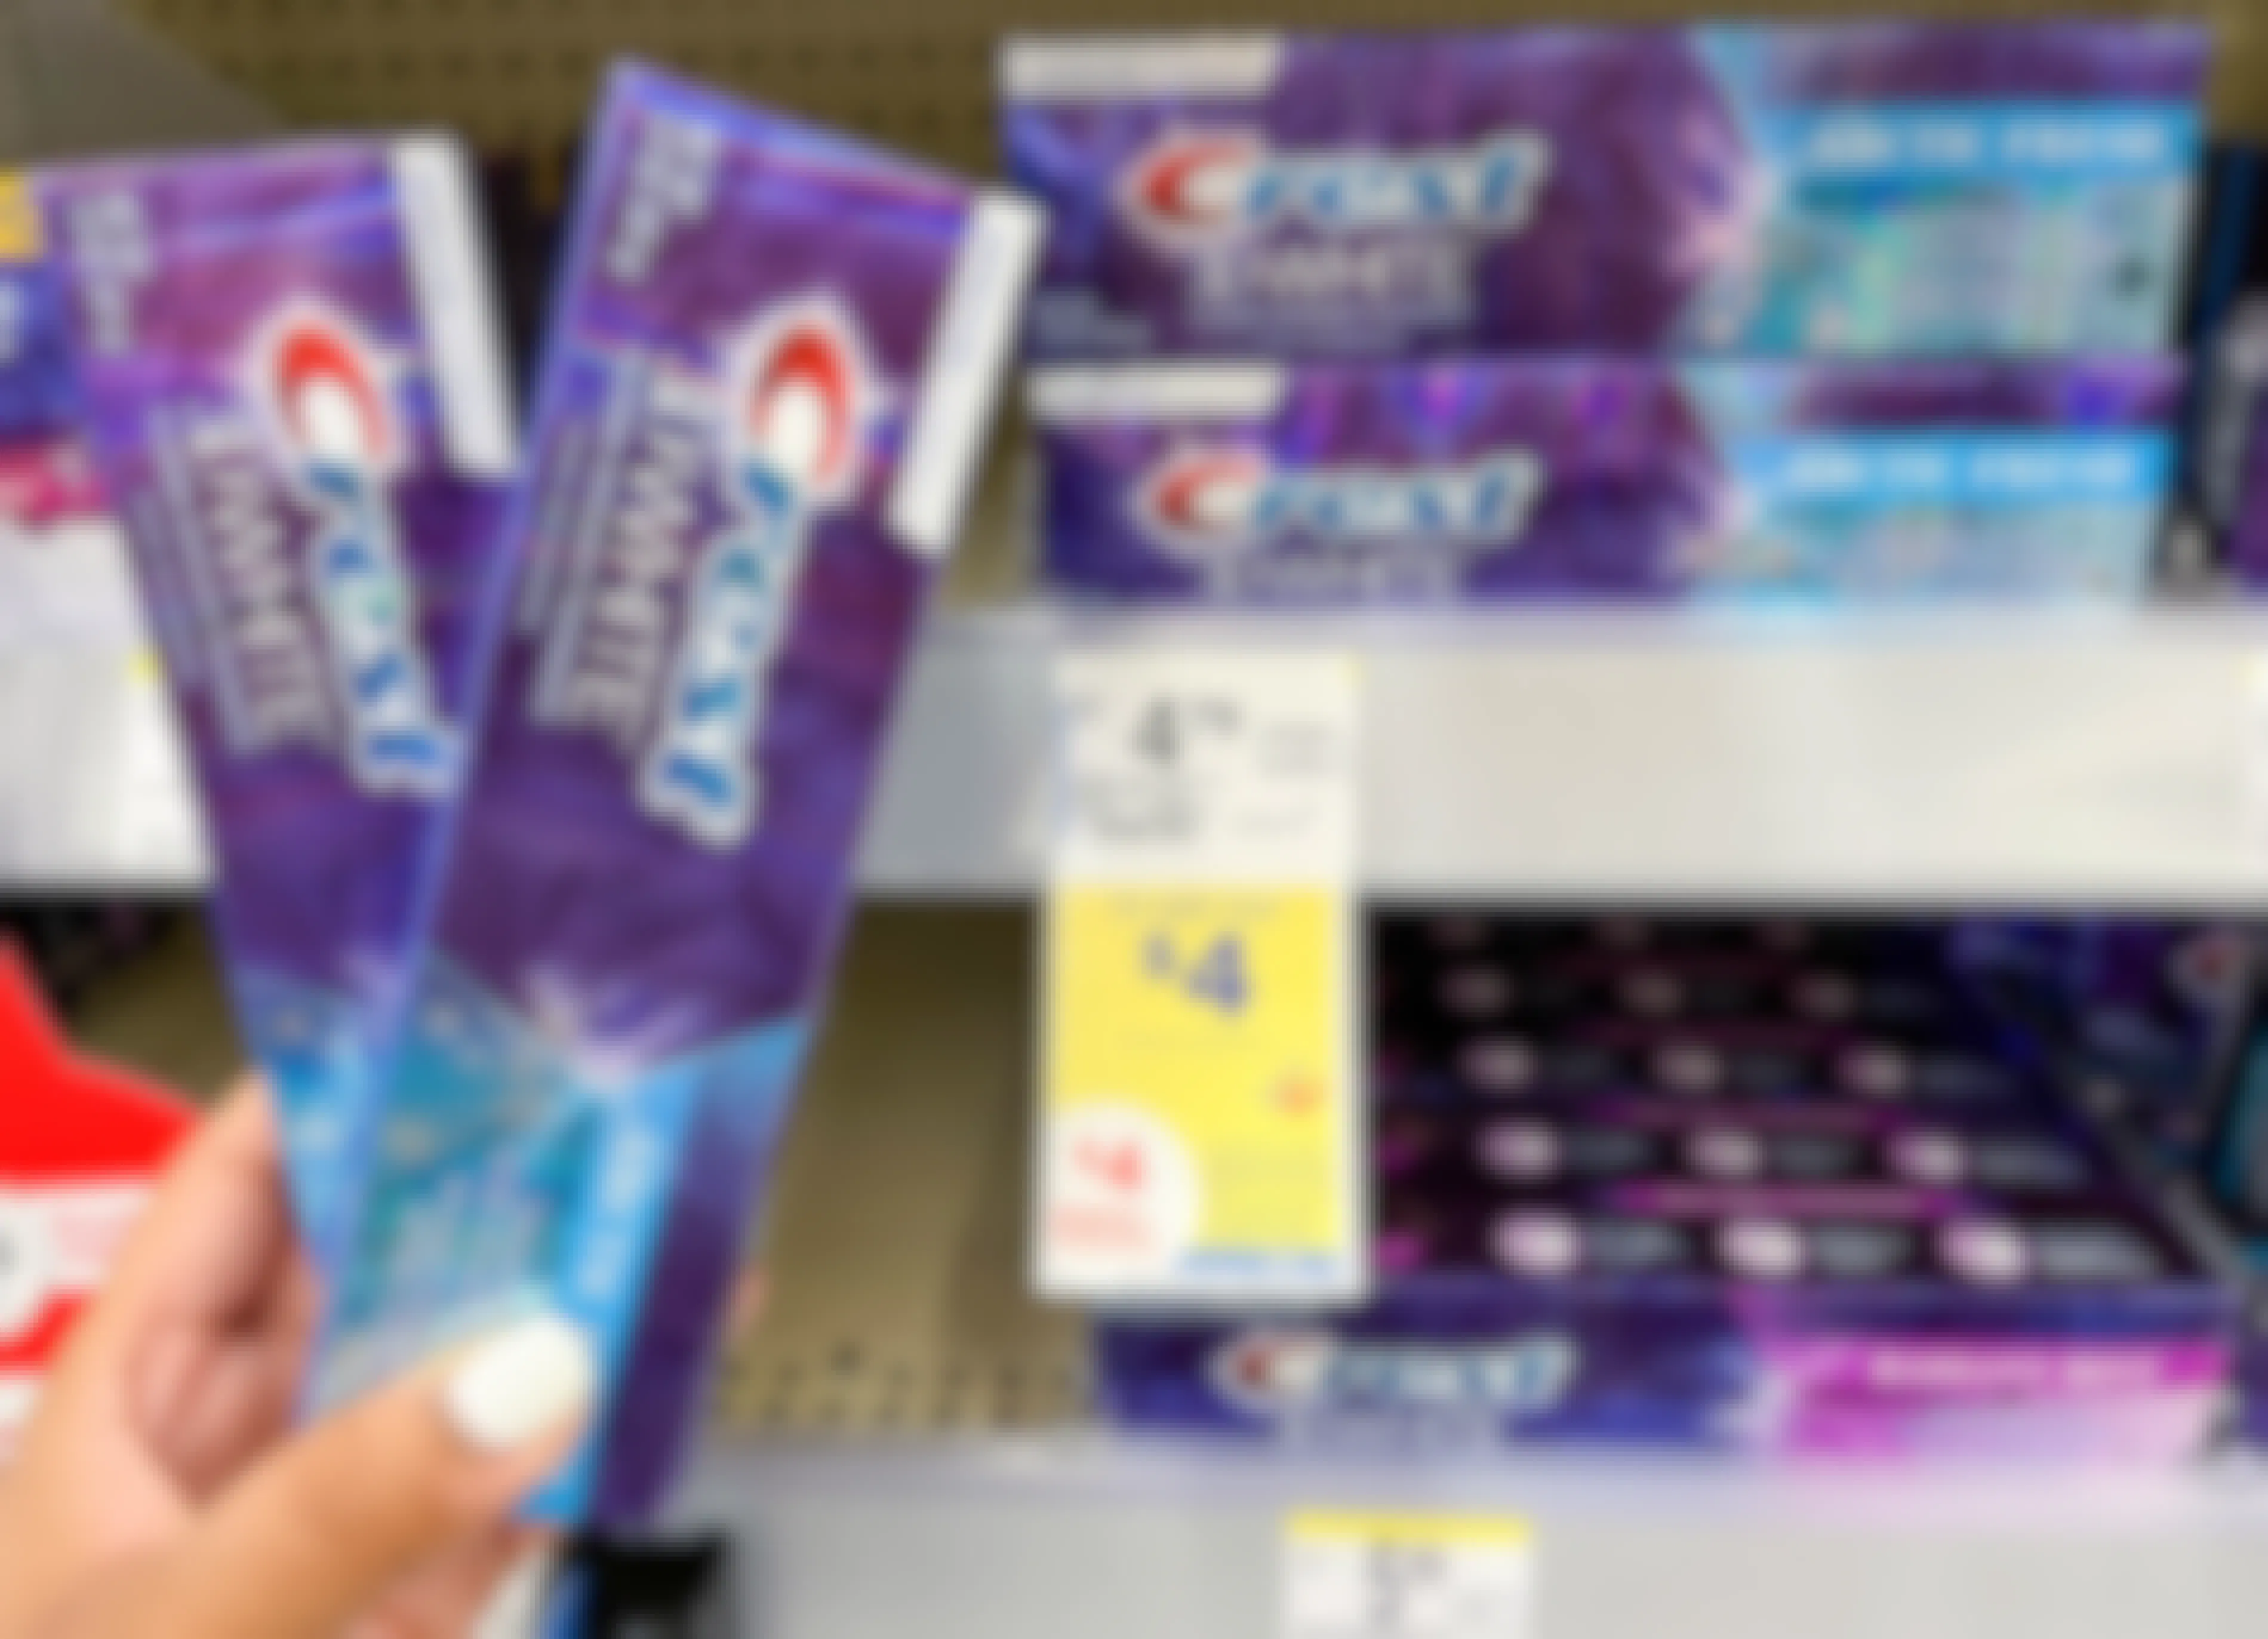 A person's hand holding two boxes of Crest toothpaste next to a sale tag at Walgreens.